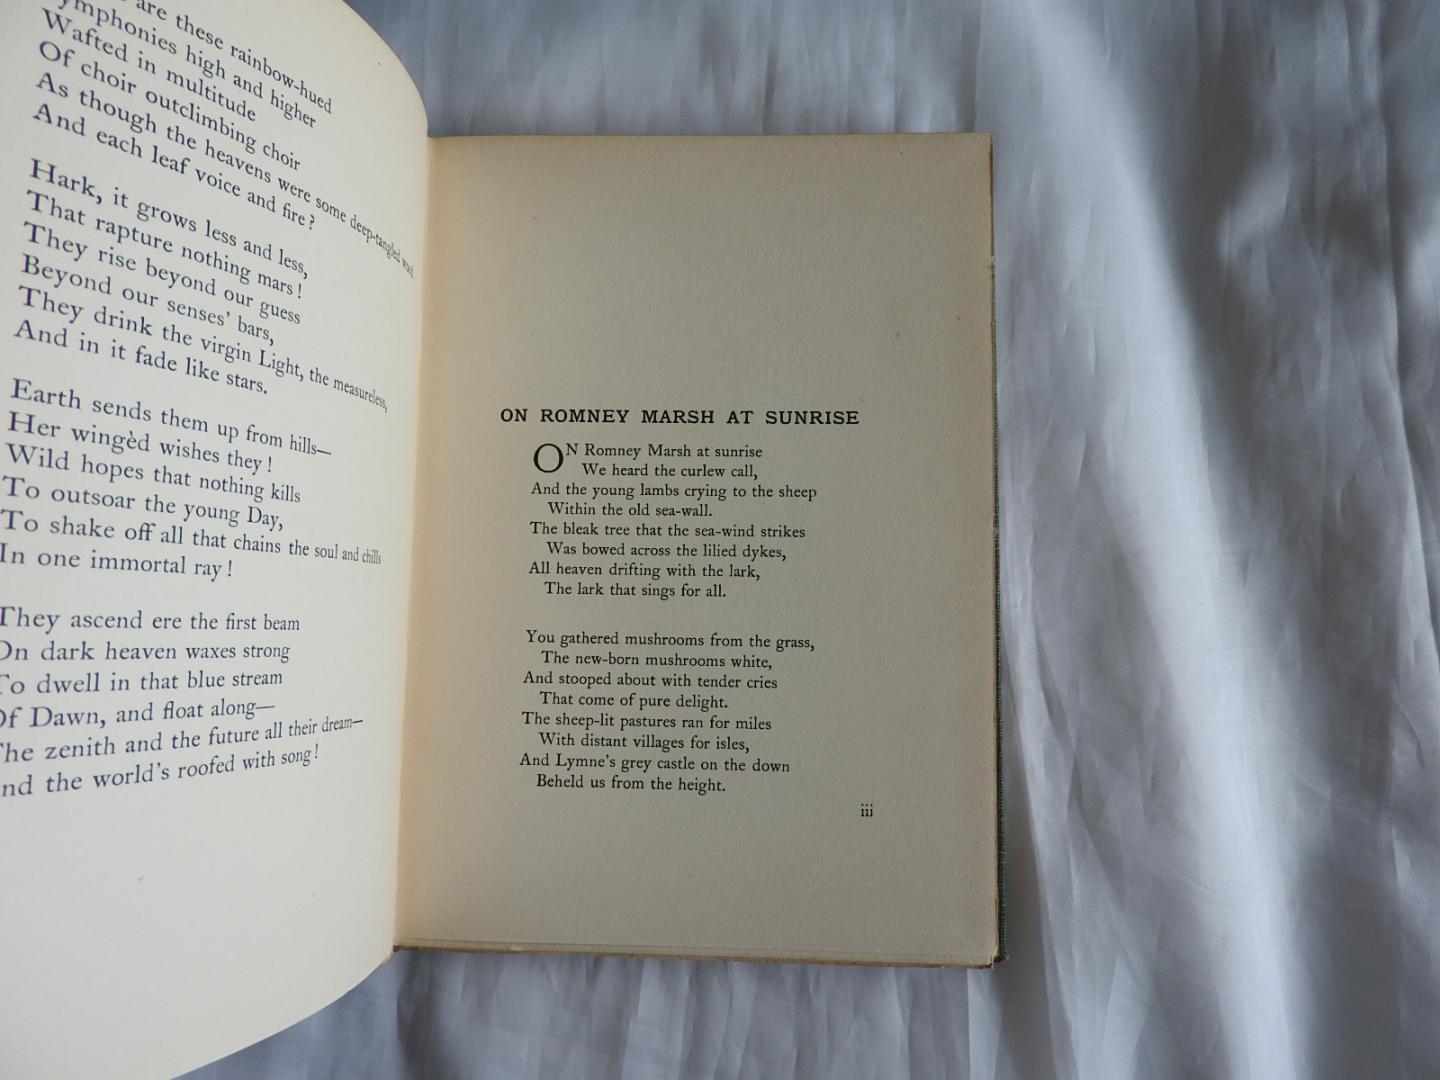 Trench, Herbert - Deirdre Wedded - Later Poems with Deirdre Wedded and Other Poems - Song for the funeral of a boy ; Shakespeare ; A charge, and other poems